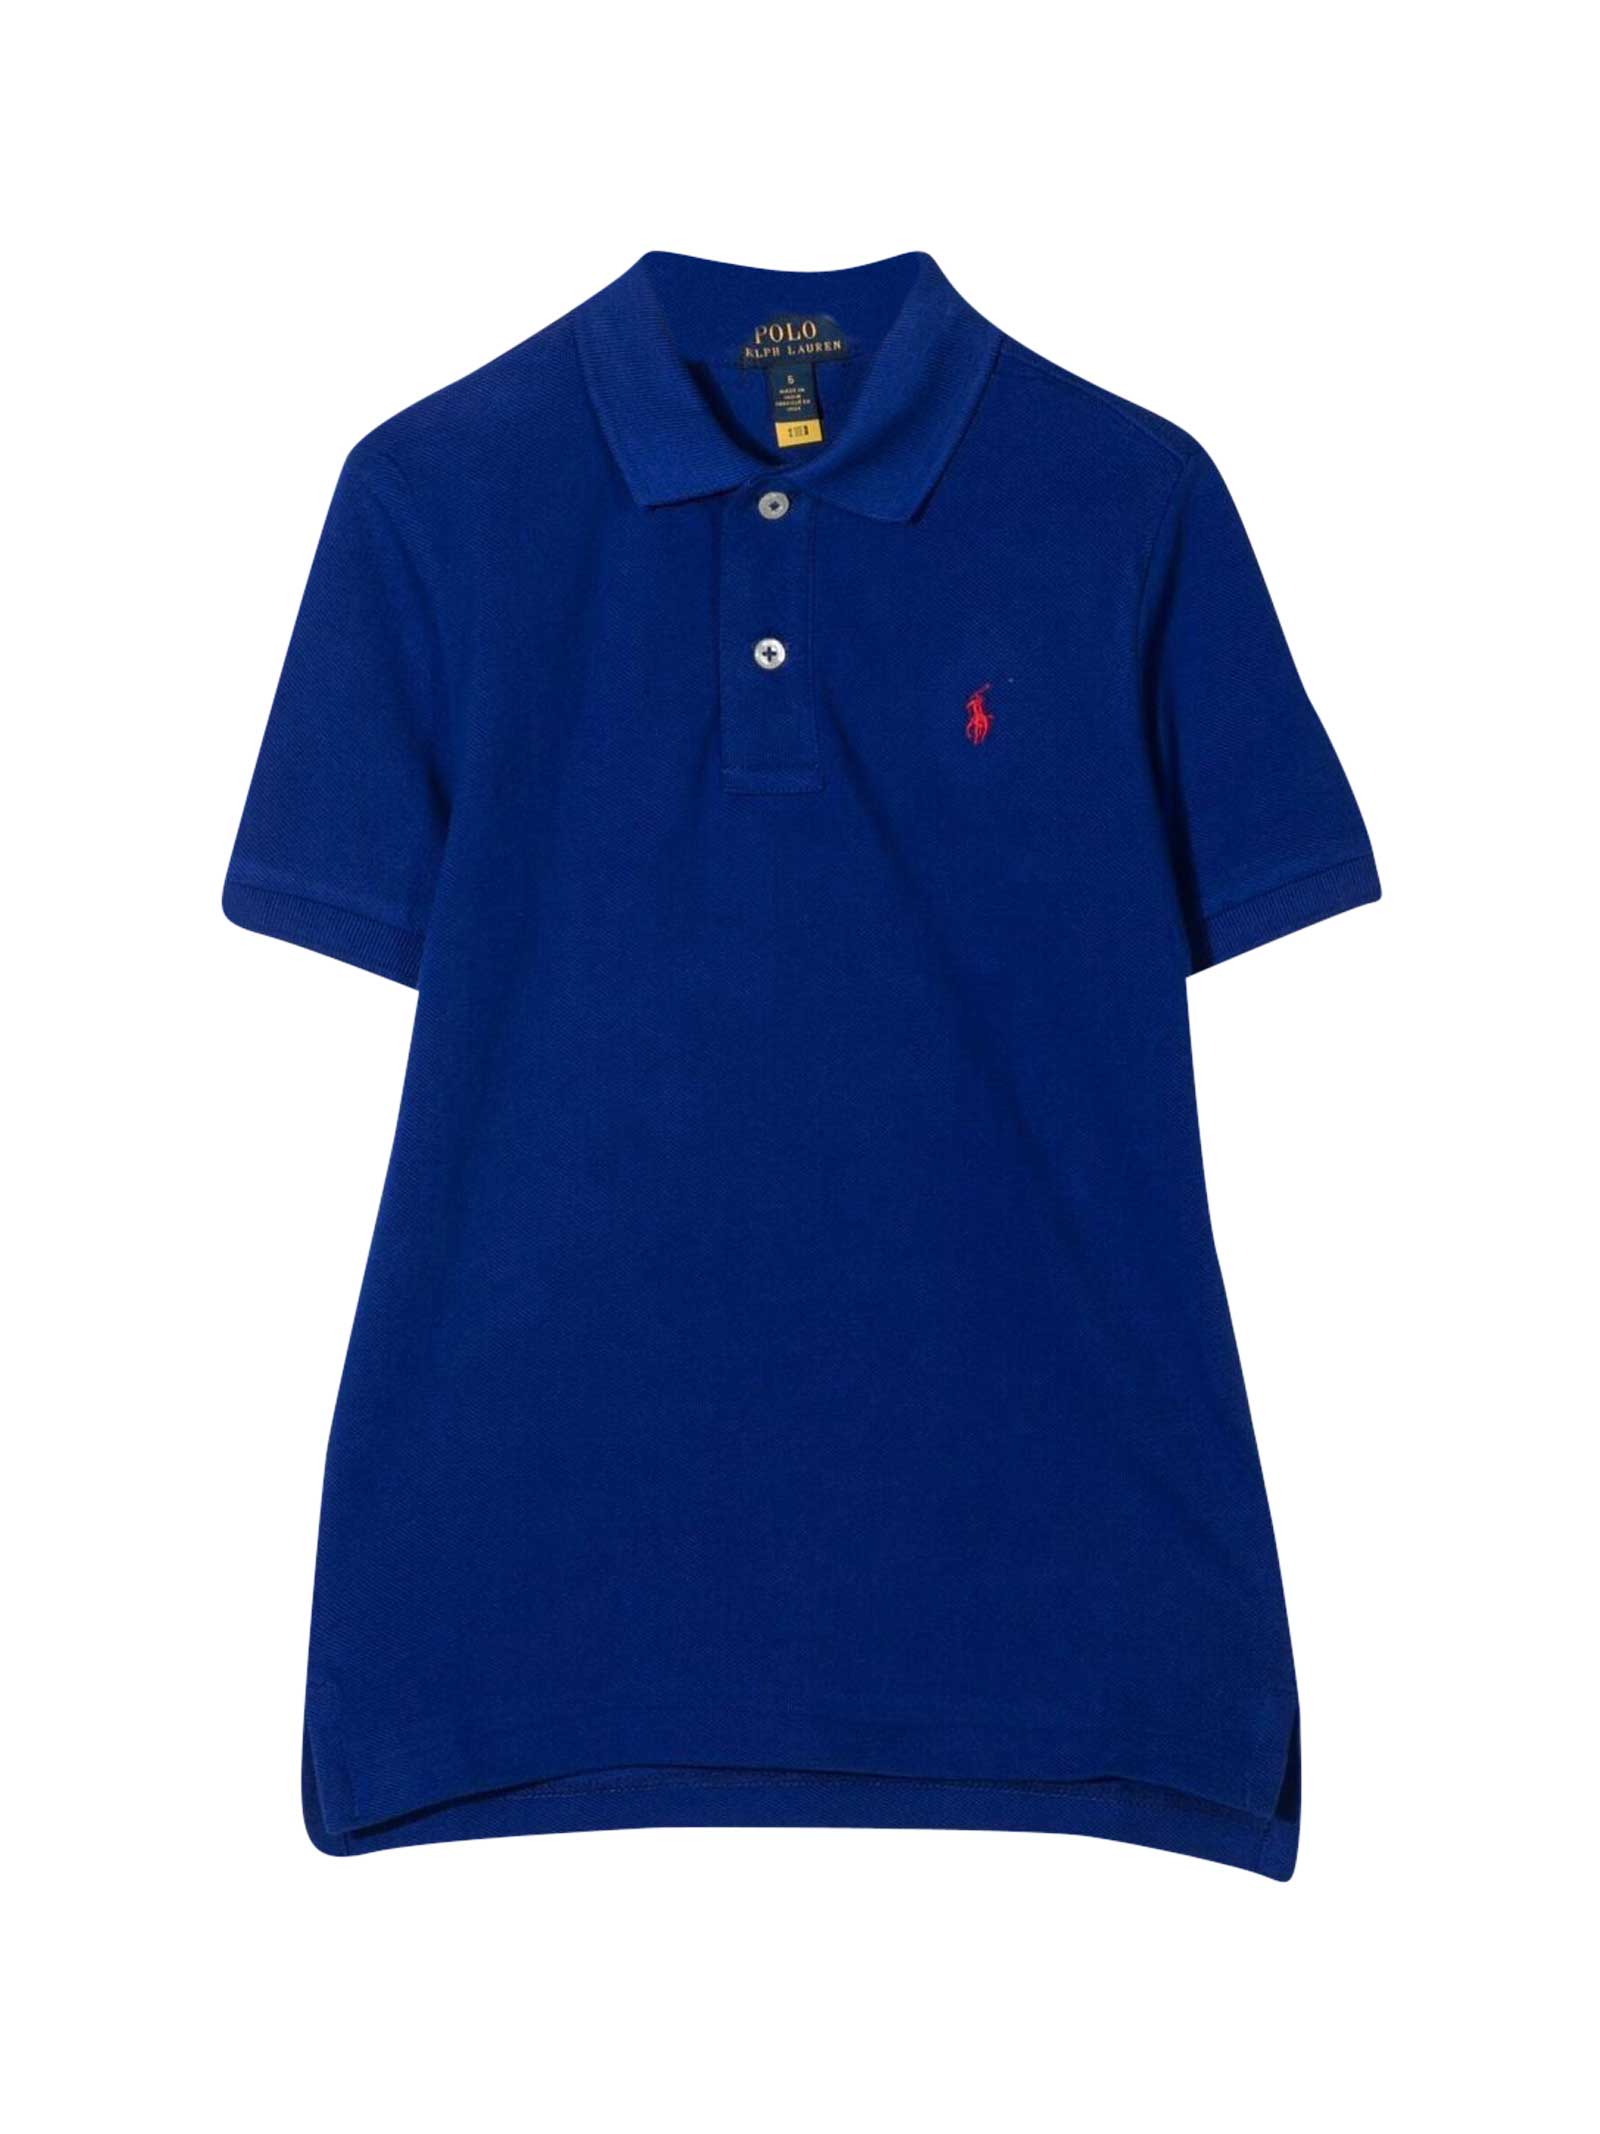 Ralph Lauren Blue Polo Shirt With Embroidery